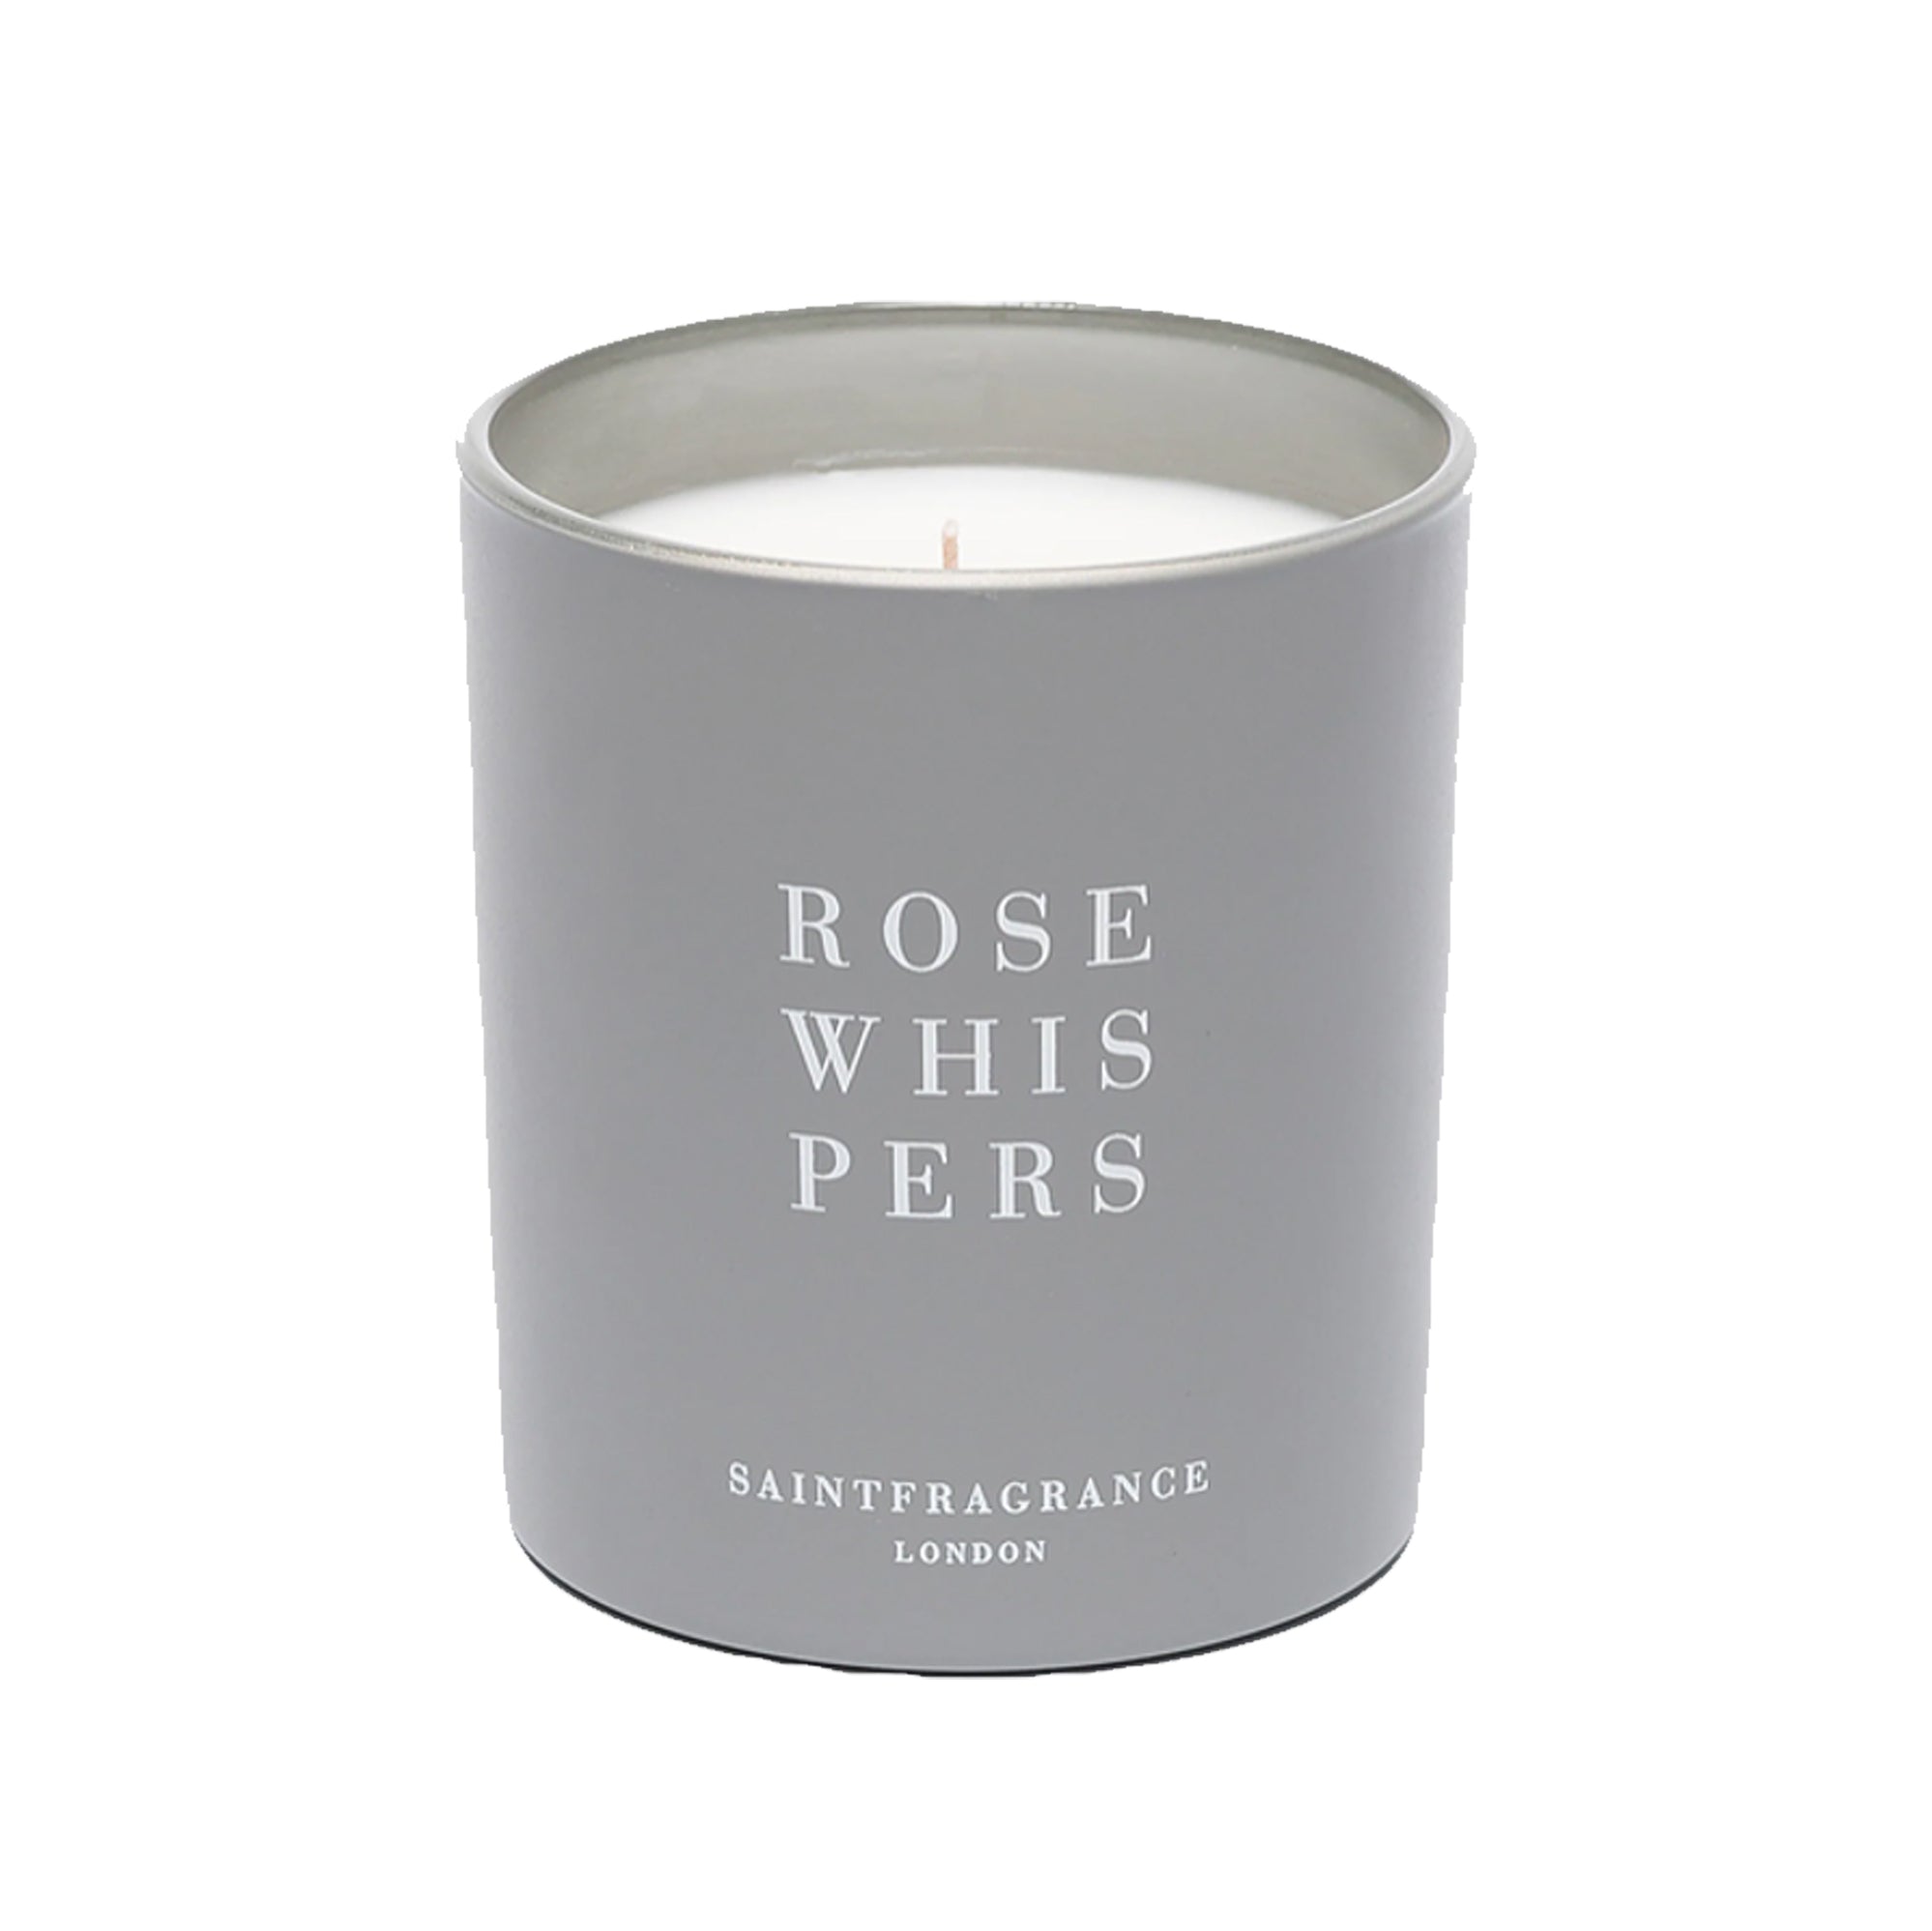 Rose Whispers 200g Scented Candle by Saint Fragrance